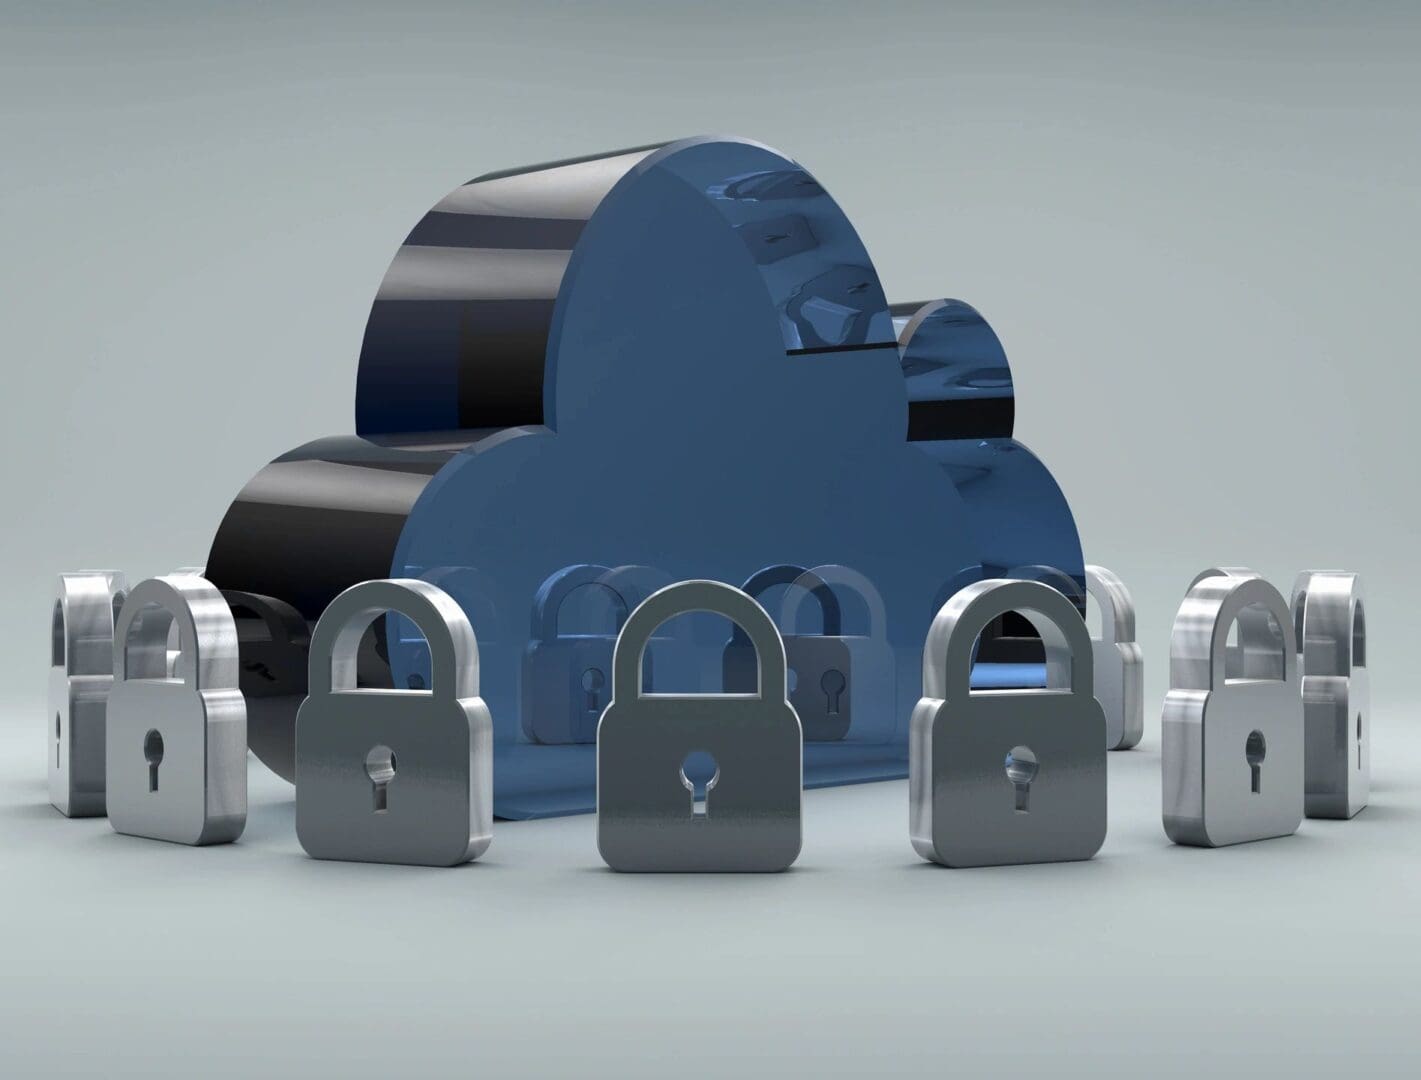 A group of padlocks sitting in front of a cloud.